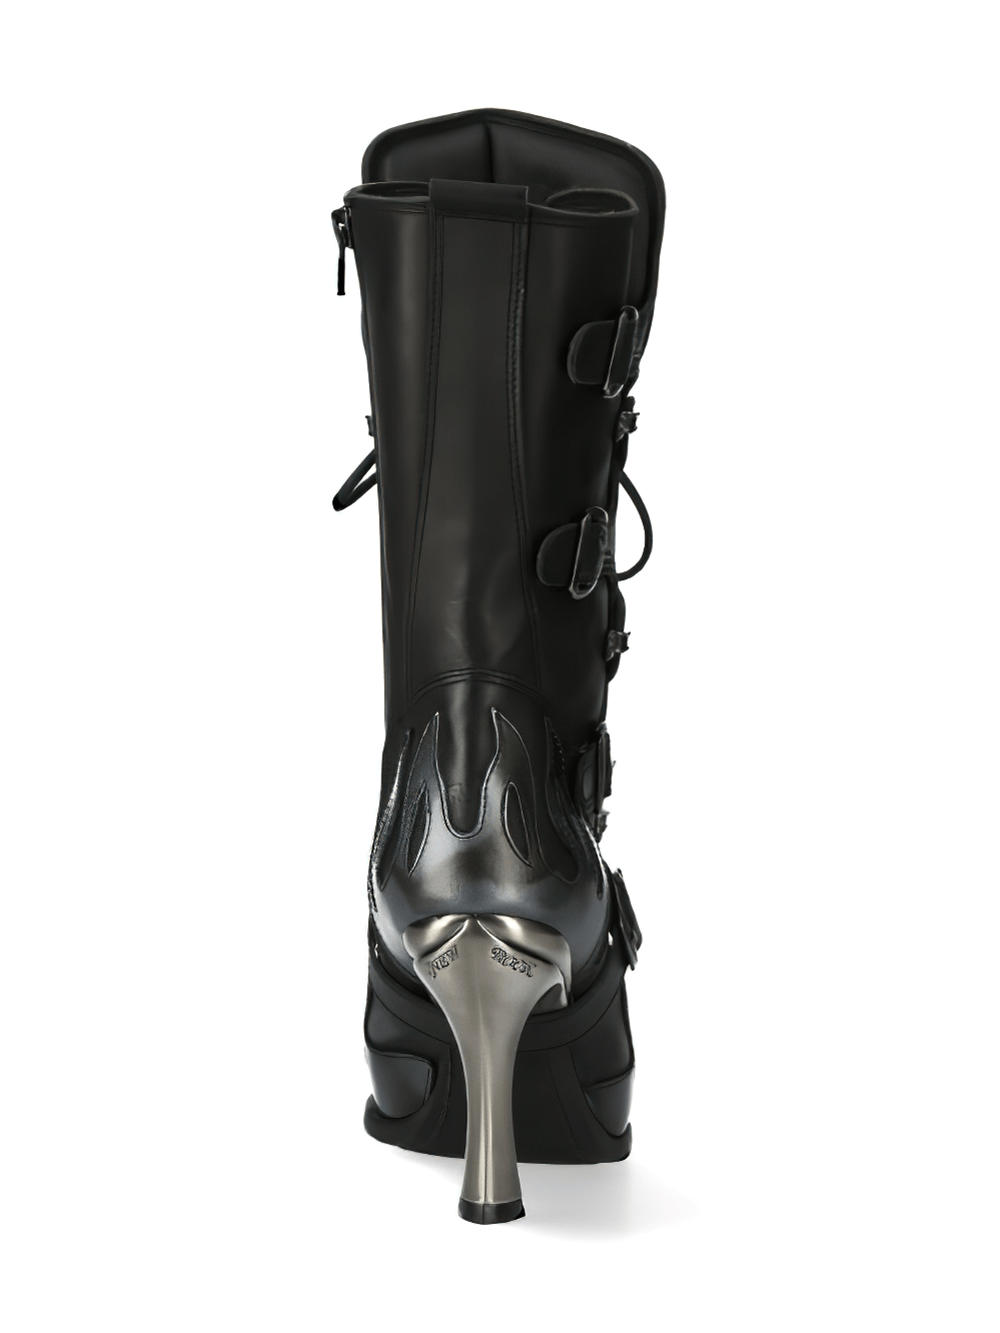 NEW ROCK Women's Laced Heeled Boots with Metallic Accents